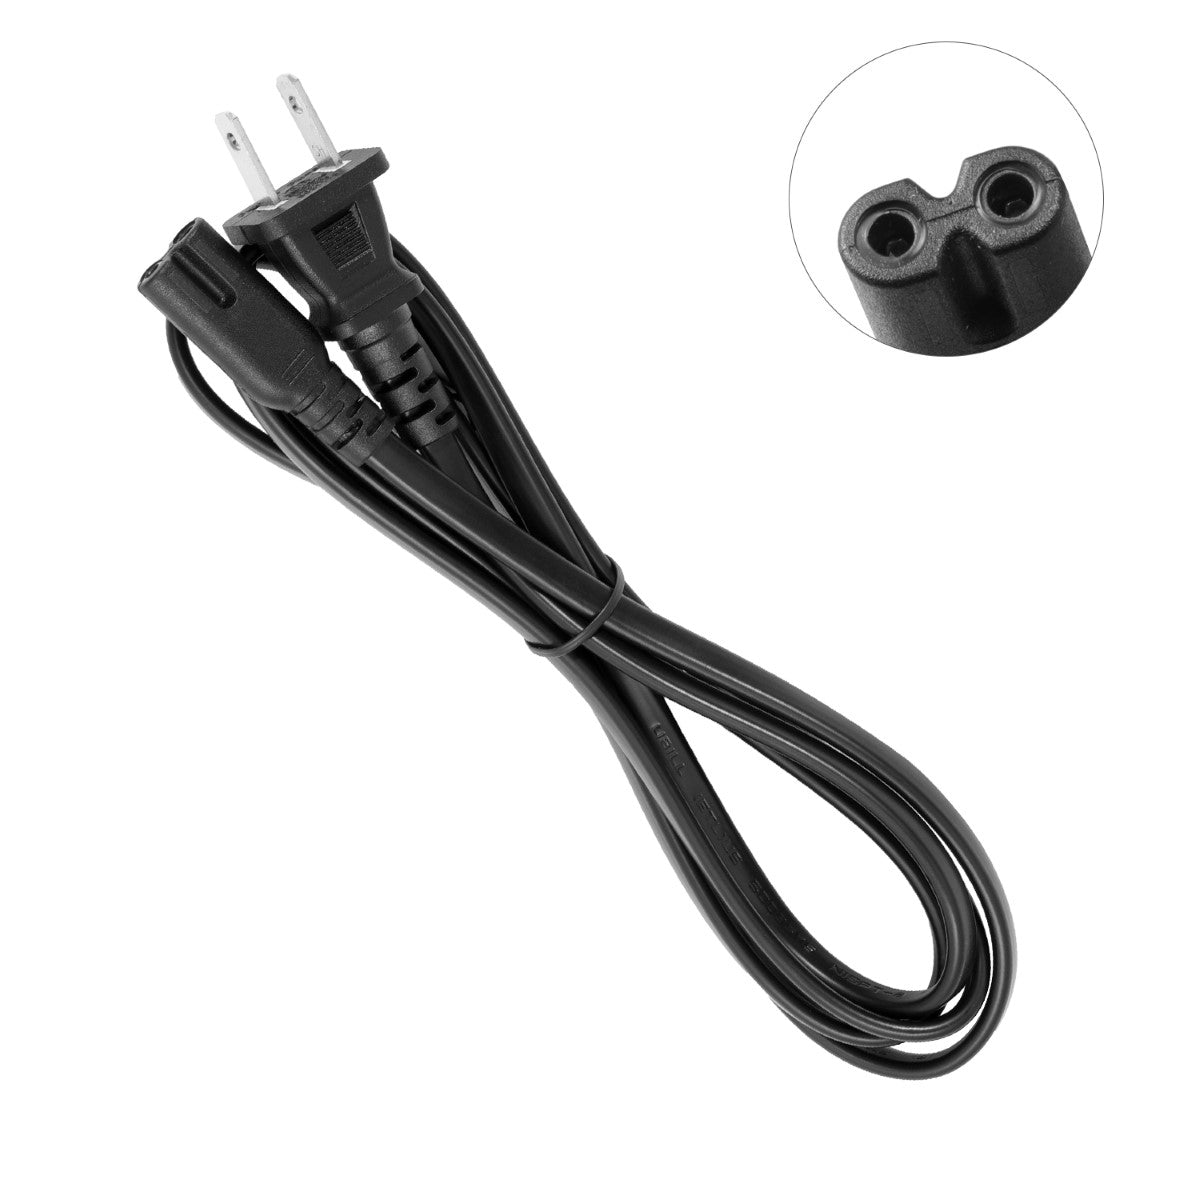 Power Cord for HP ENVY 4508 e-All-in-One Printer.